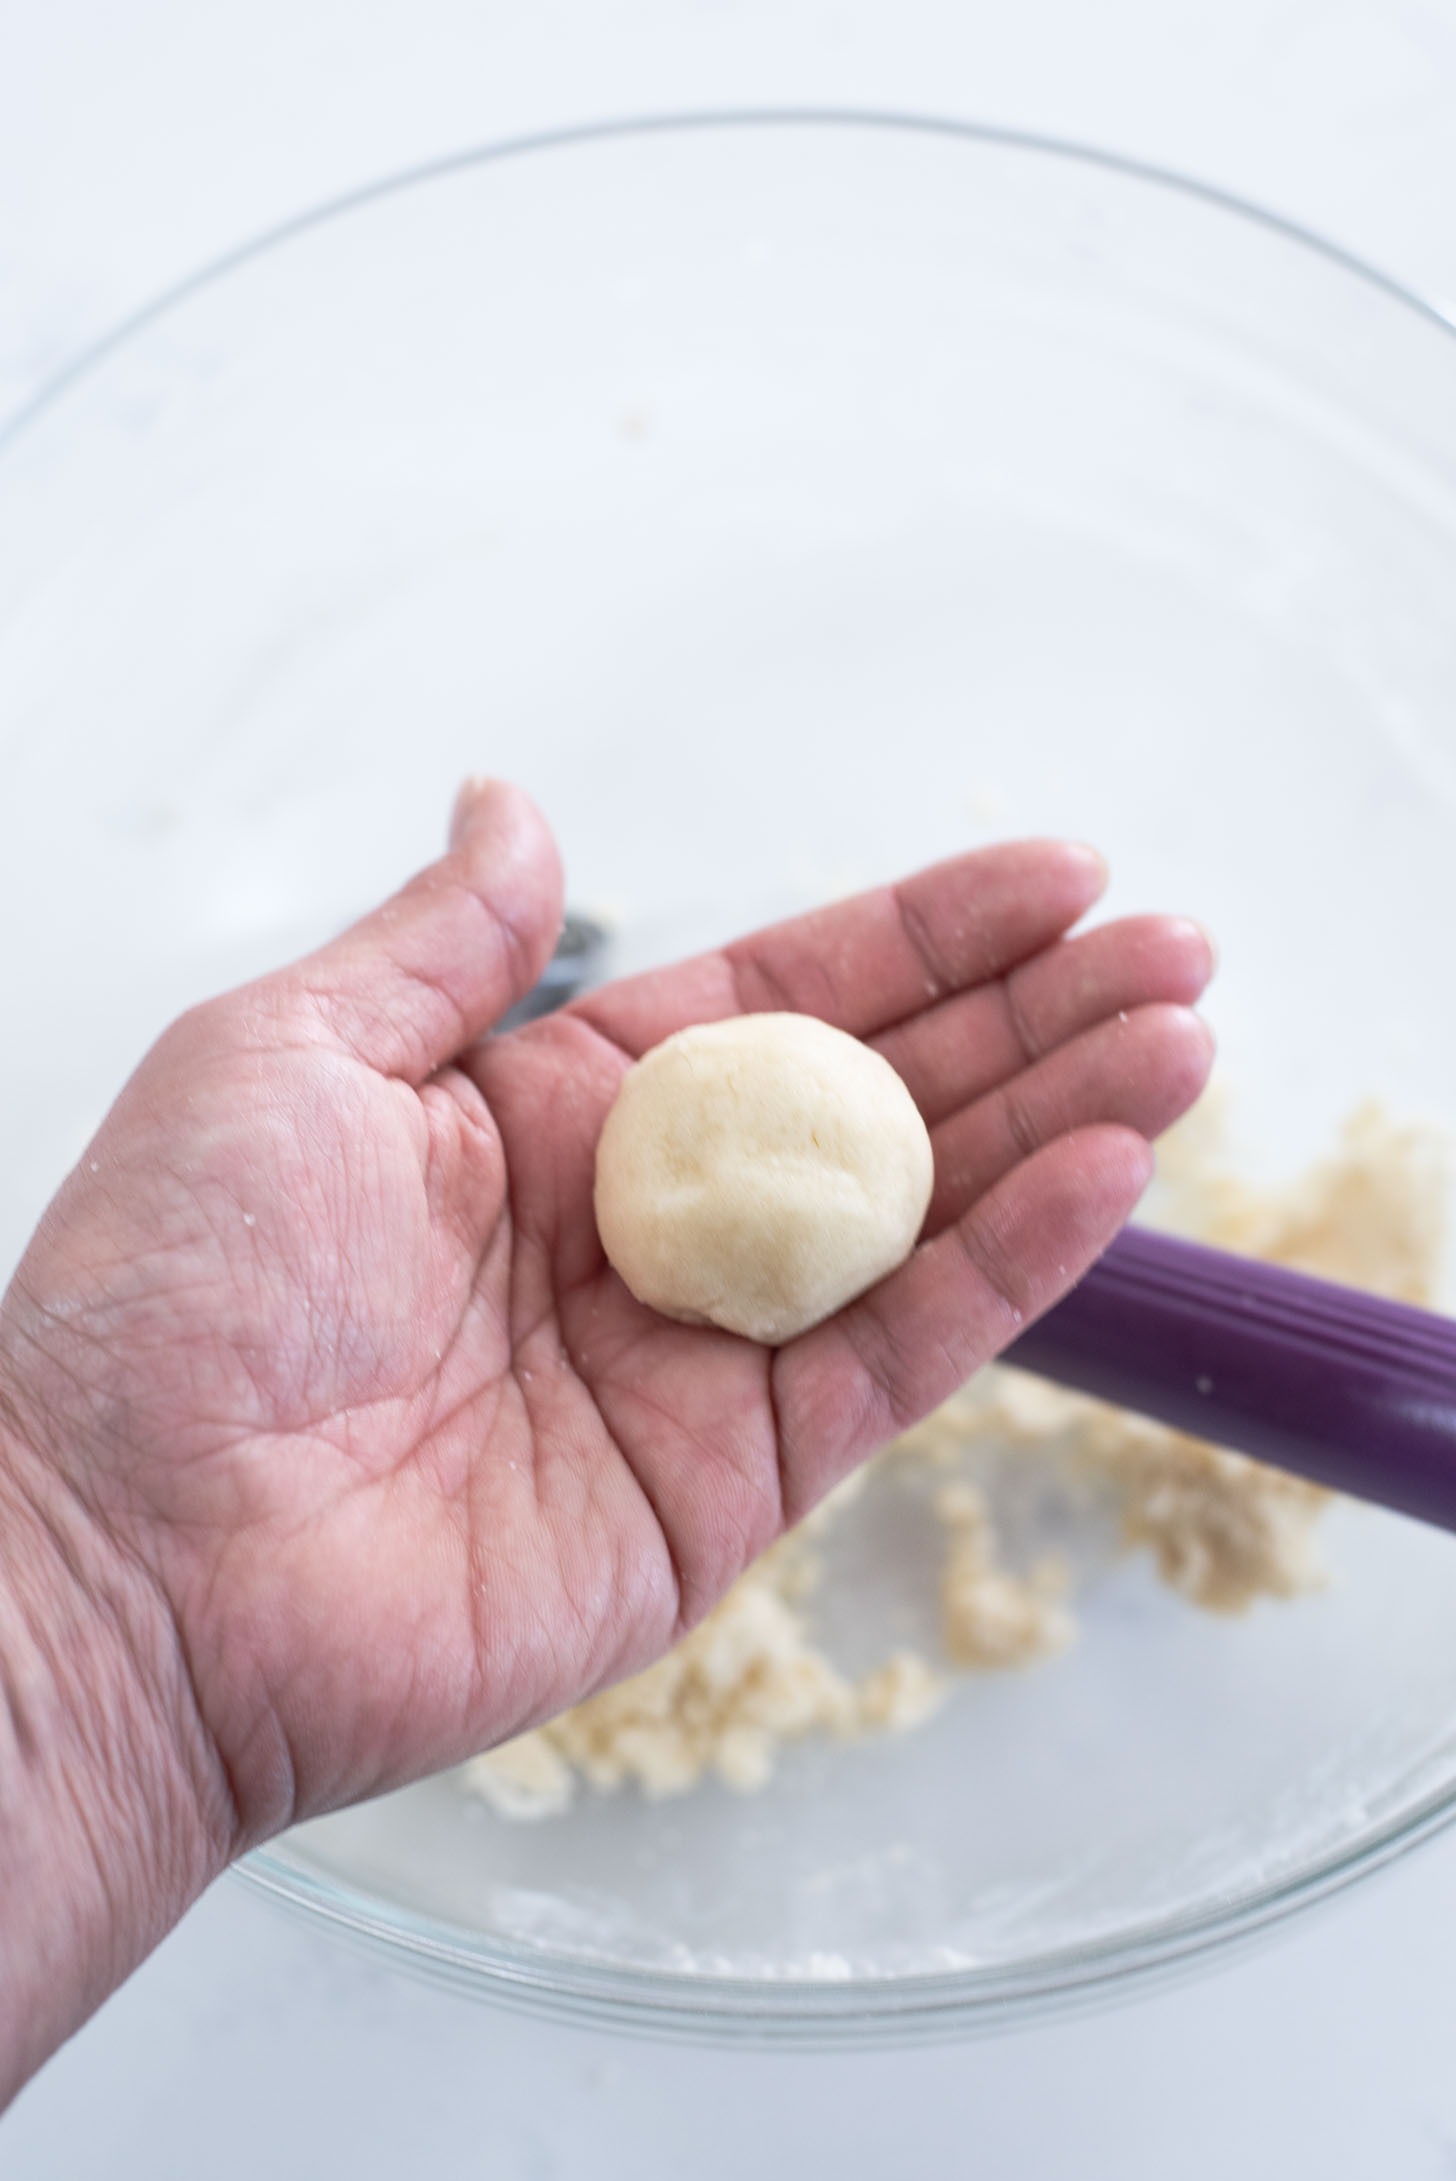 A cookie dough is formed into a ball in a hand.